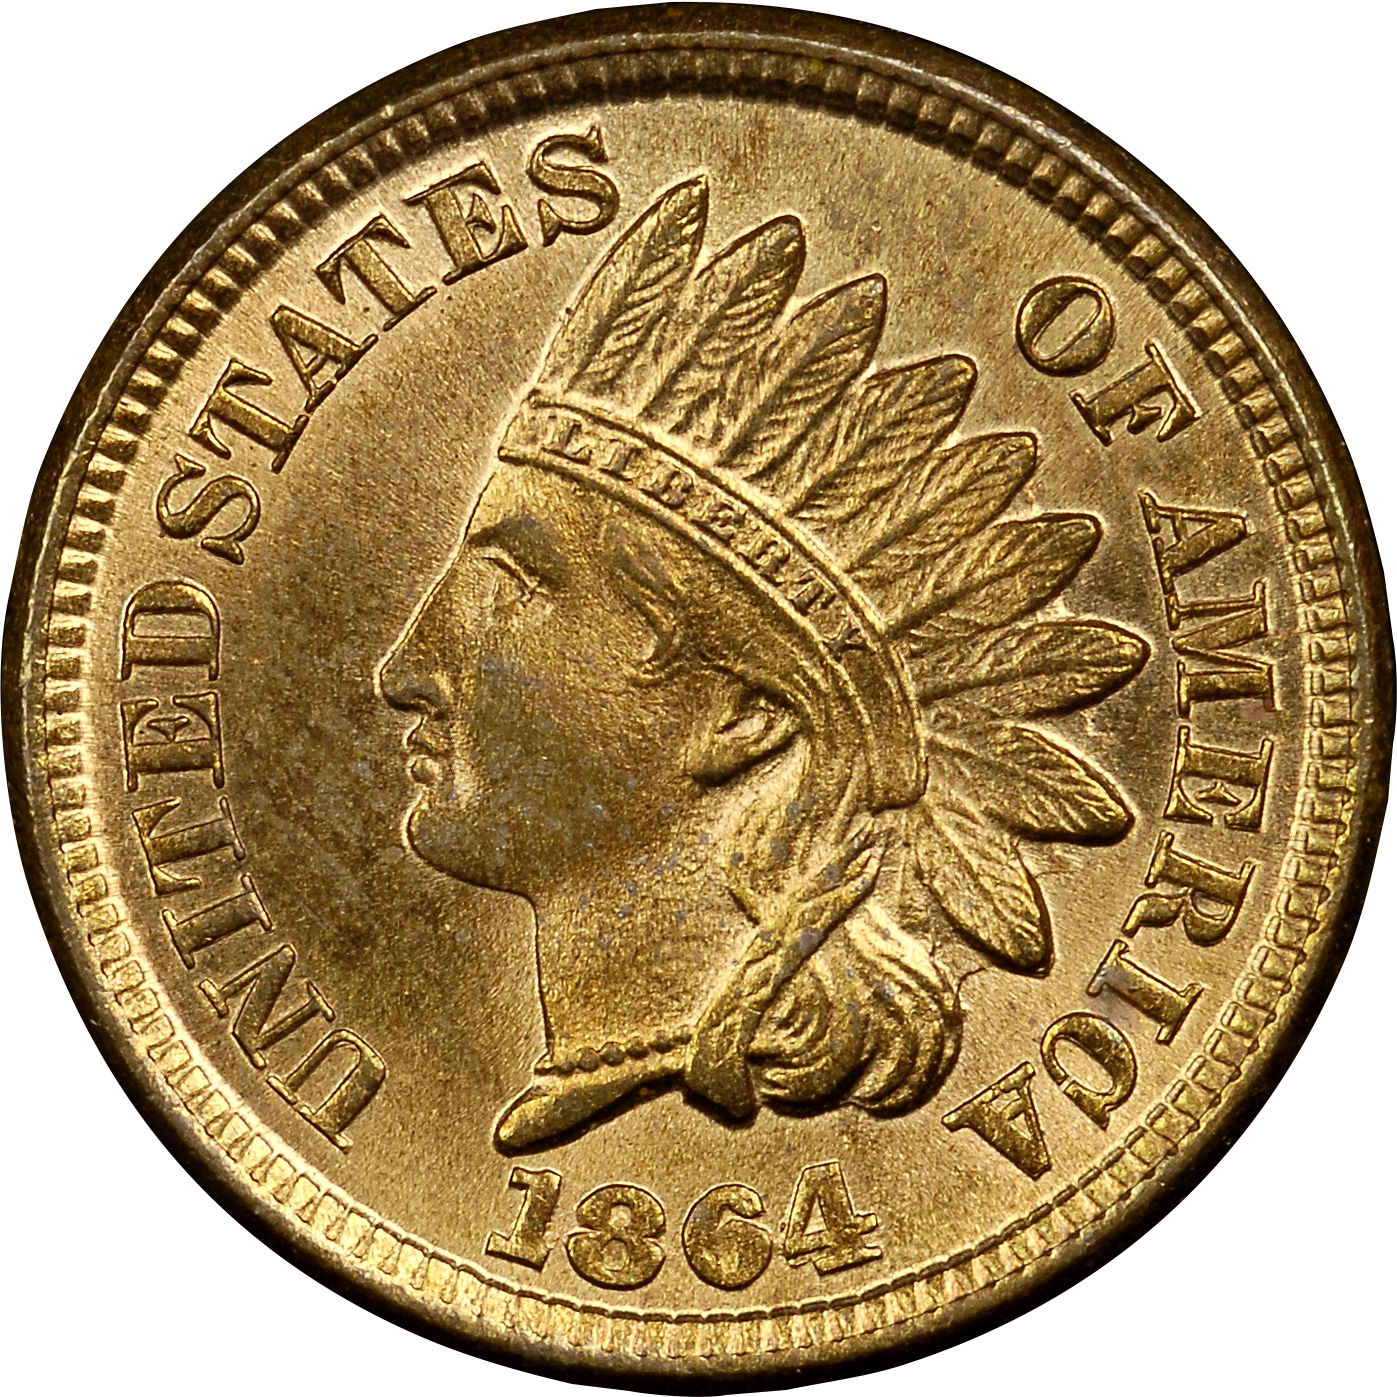 1864 No-L RPD-006 Indian Head Penny - Photos courtesy of Heritage Auctions